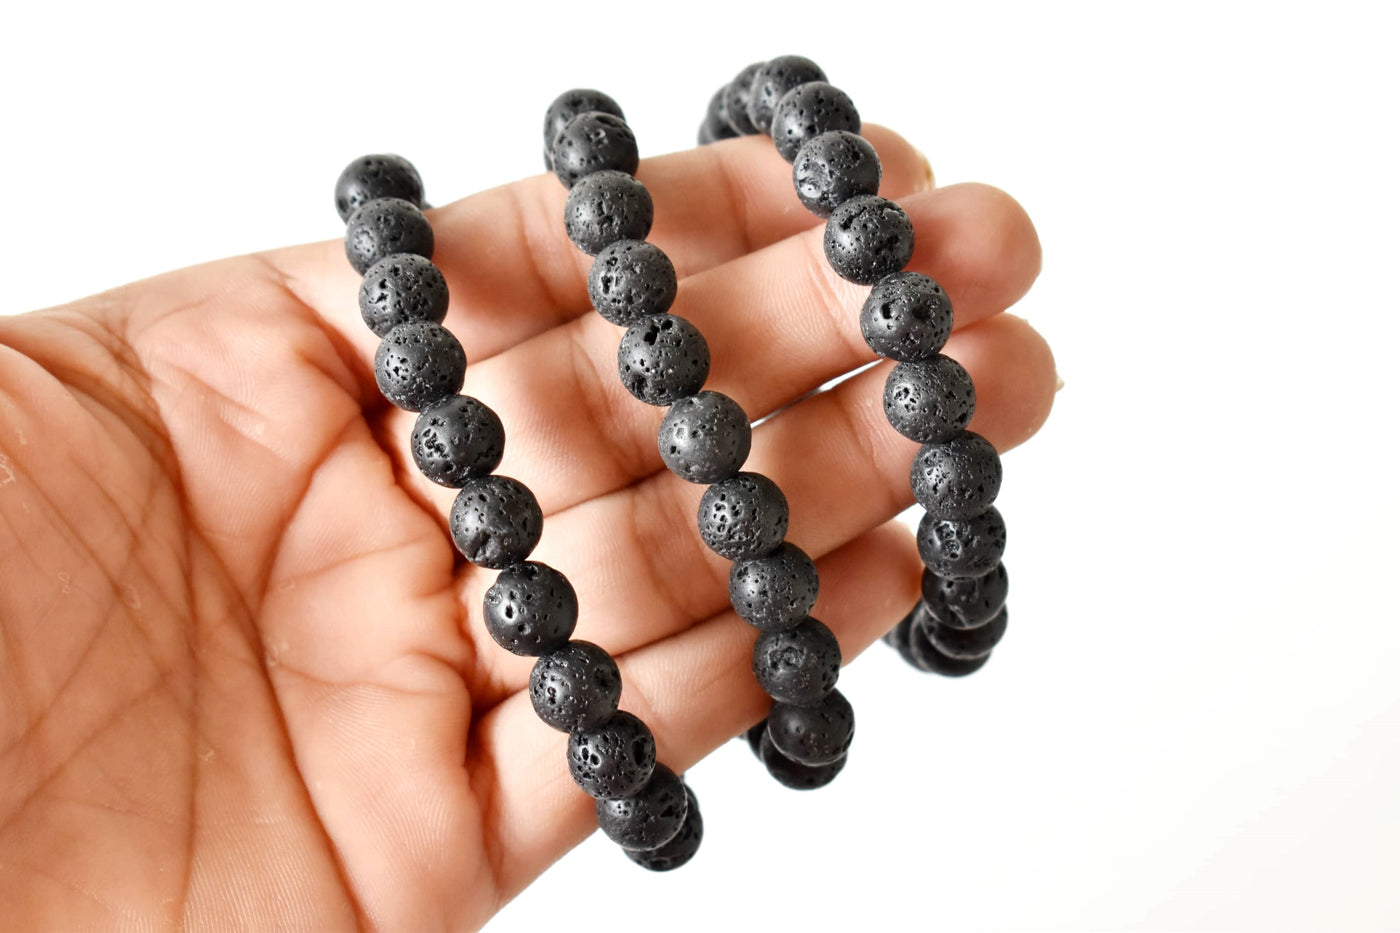 Lava Bracelet (Protection and Stress Relief)